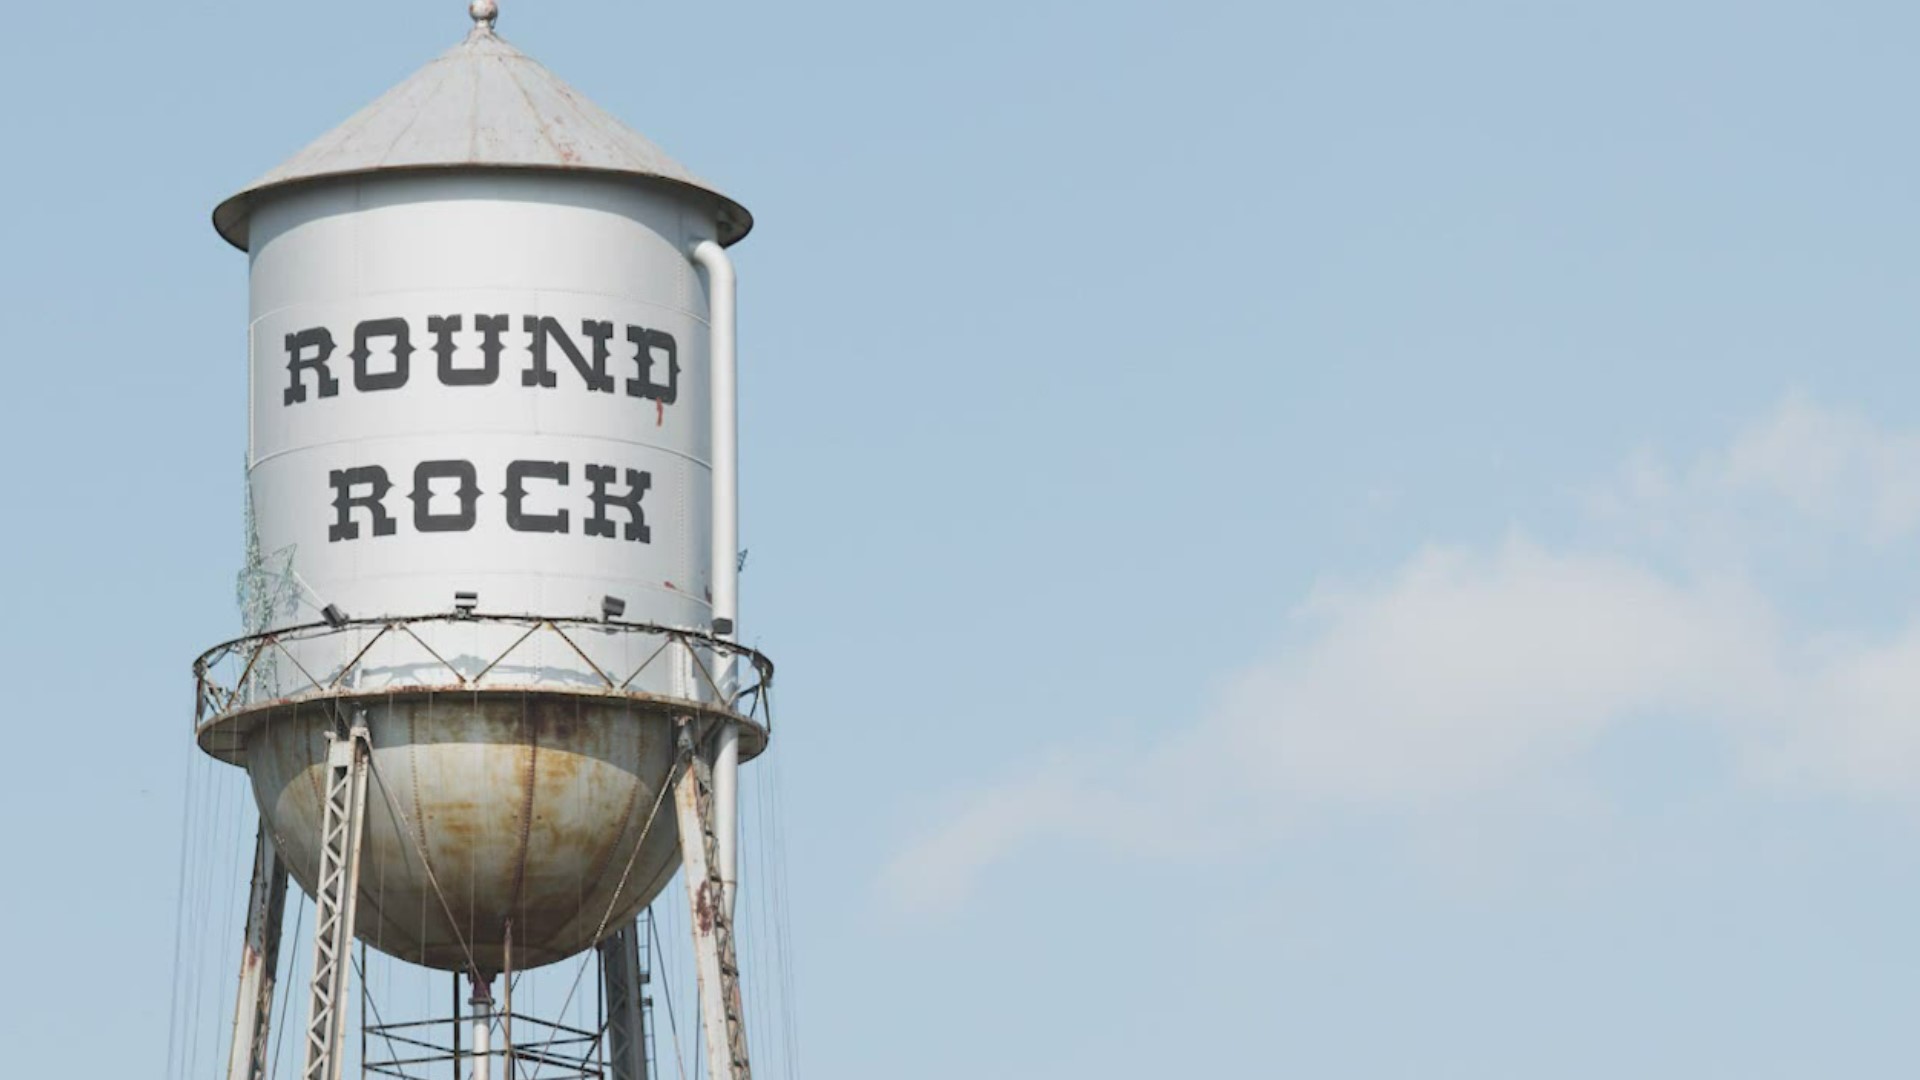 Round Rock has been named one of the fastest-growing cities in the country, according to Wallethub.